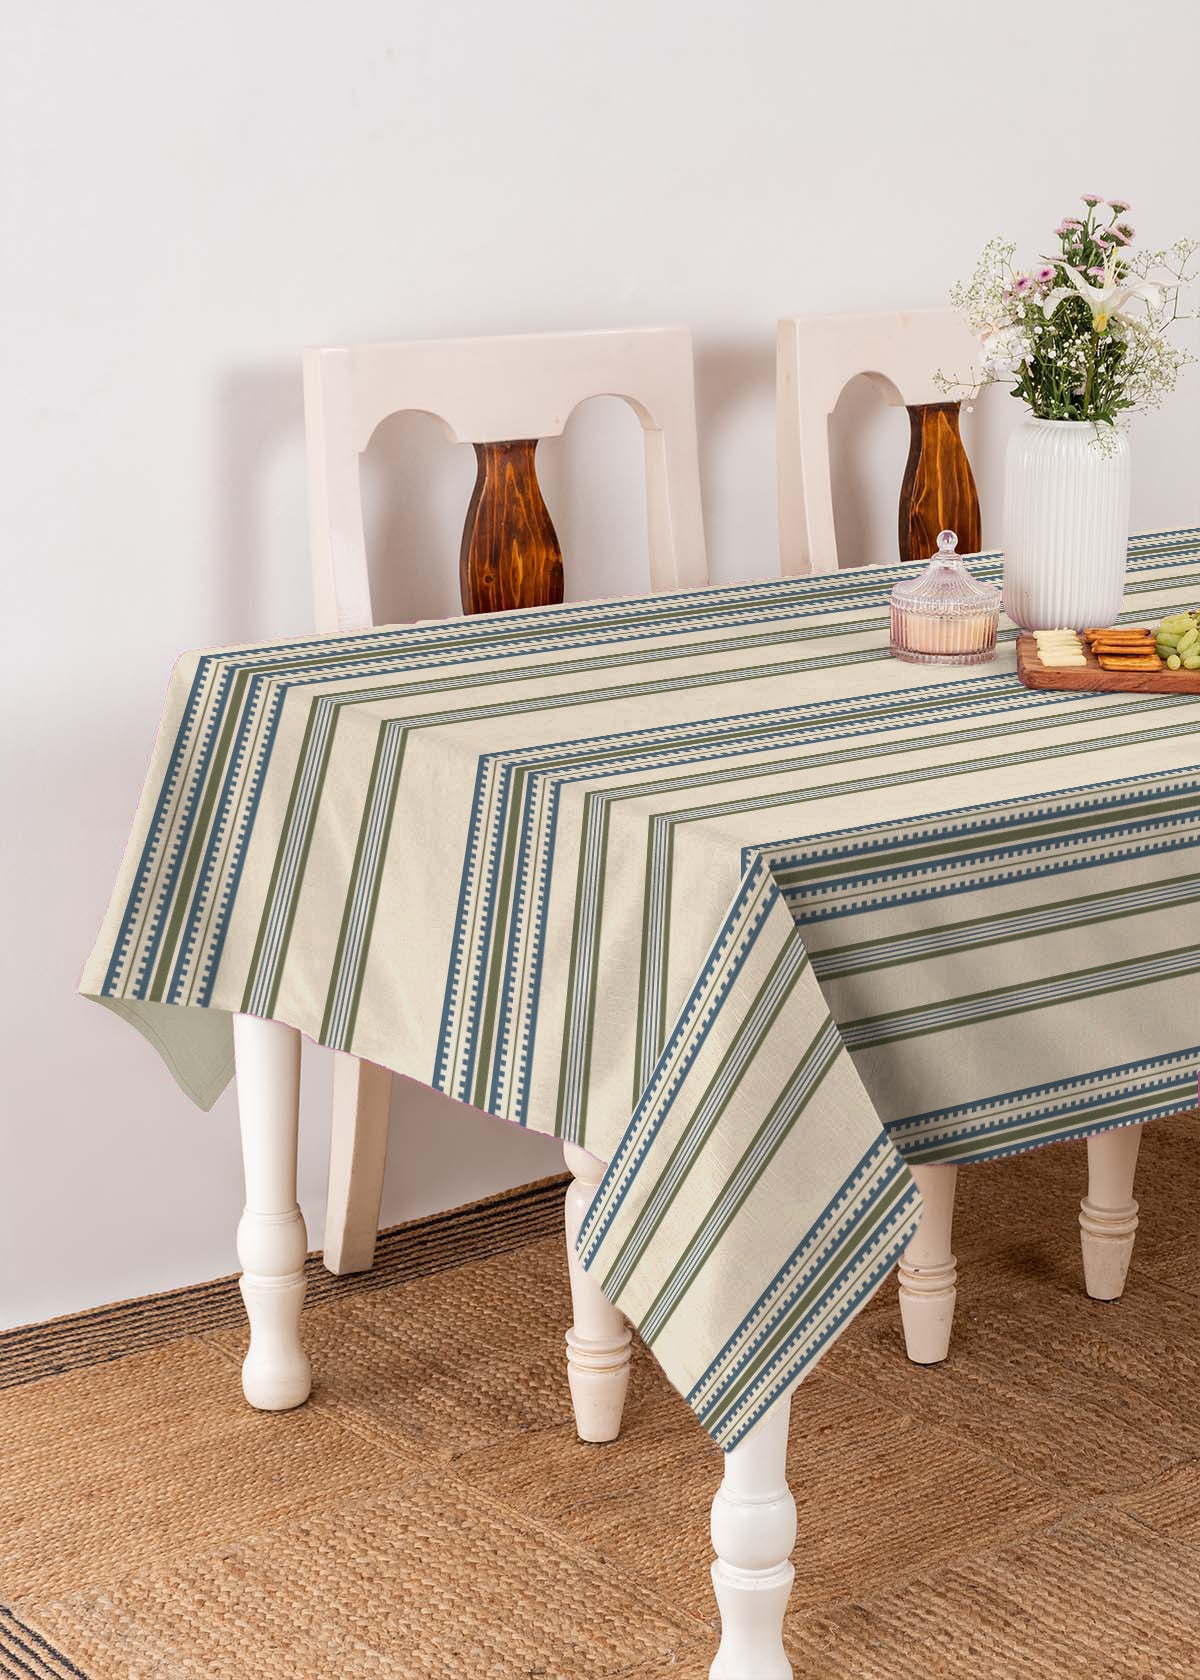 Roman stripes 100% cotton customisable geometric table cloth for dining - Pepper green & Night blue